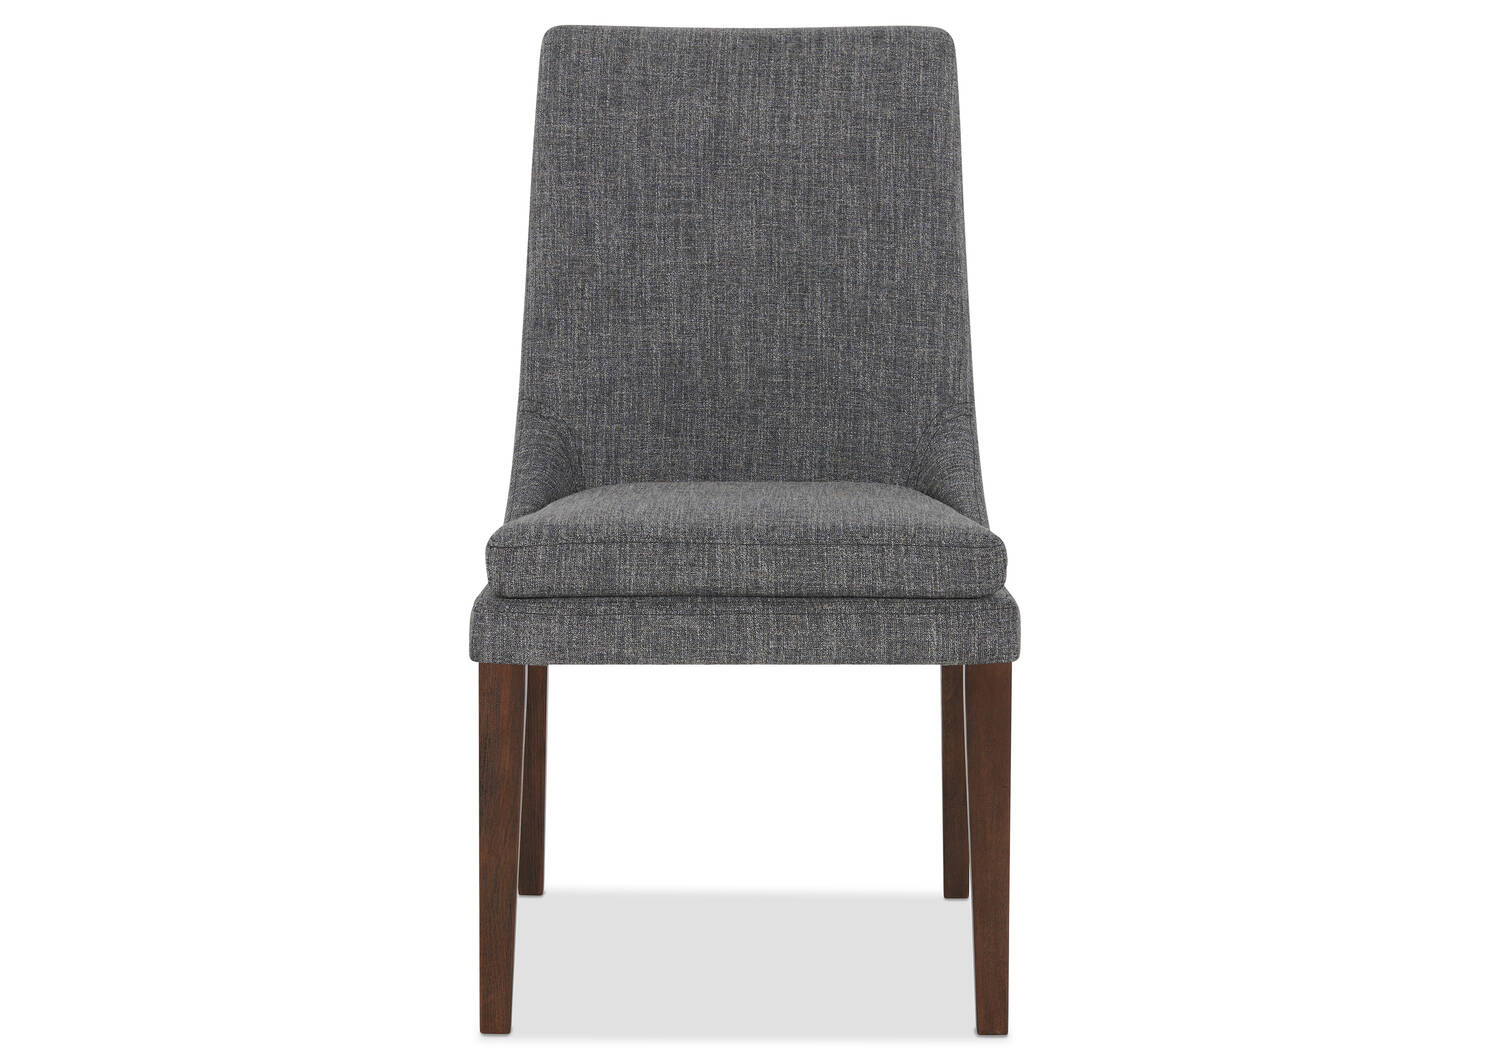 Montana Dining Chair -Lund Charcoal